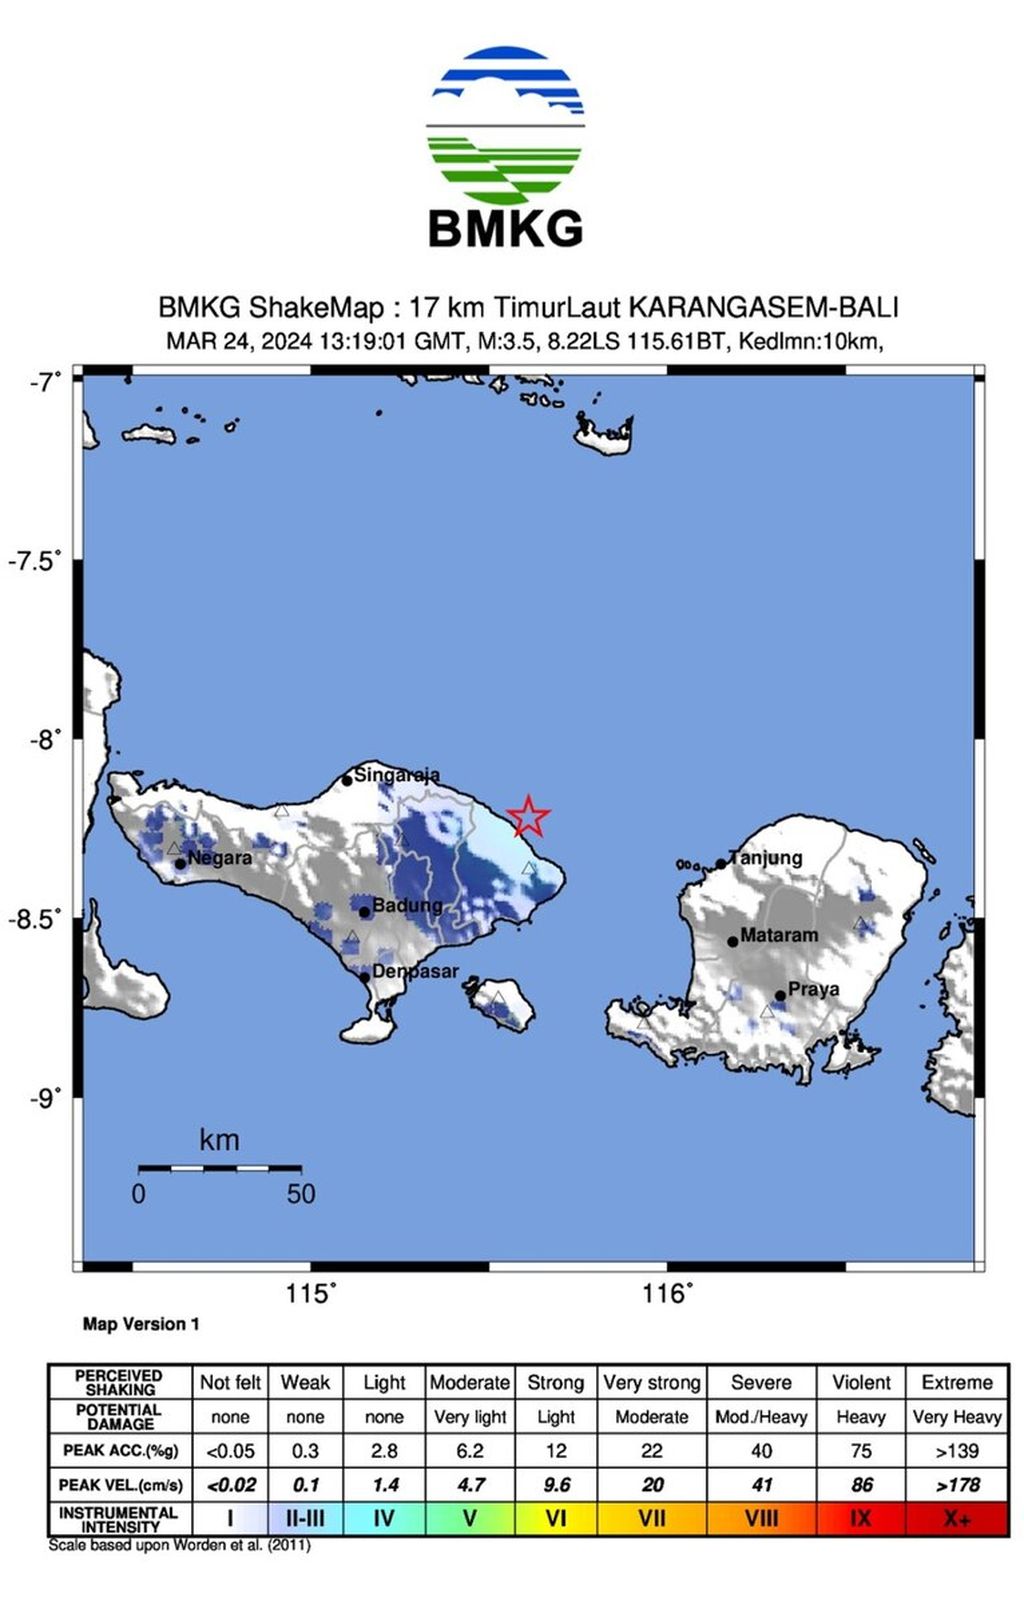 An earthquake measuring M 3.5 occurred in the waters northeast of Karangasem, Bali, Sunday (24/3/2024) evening.